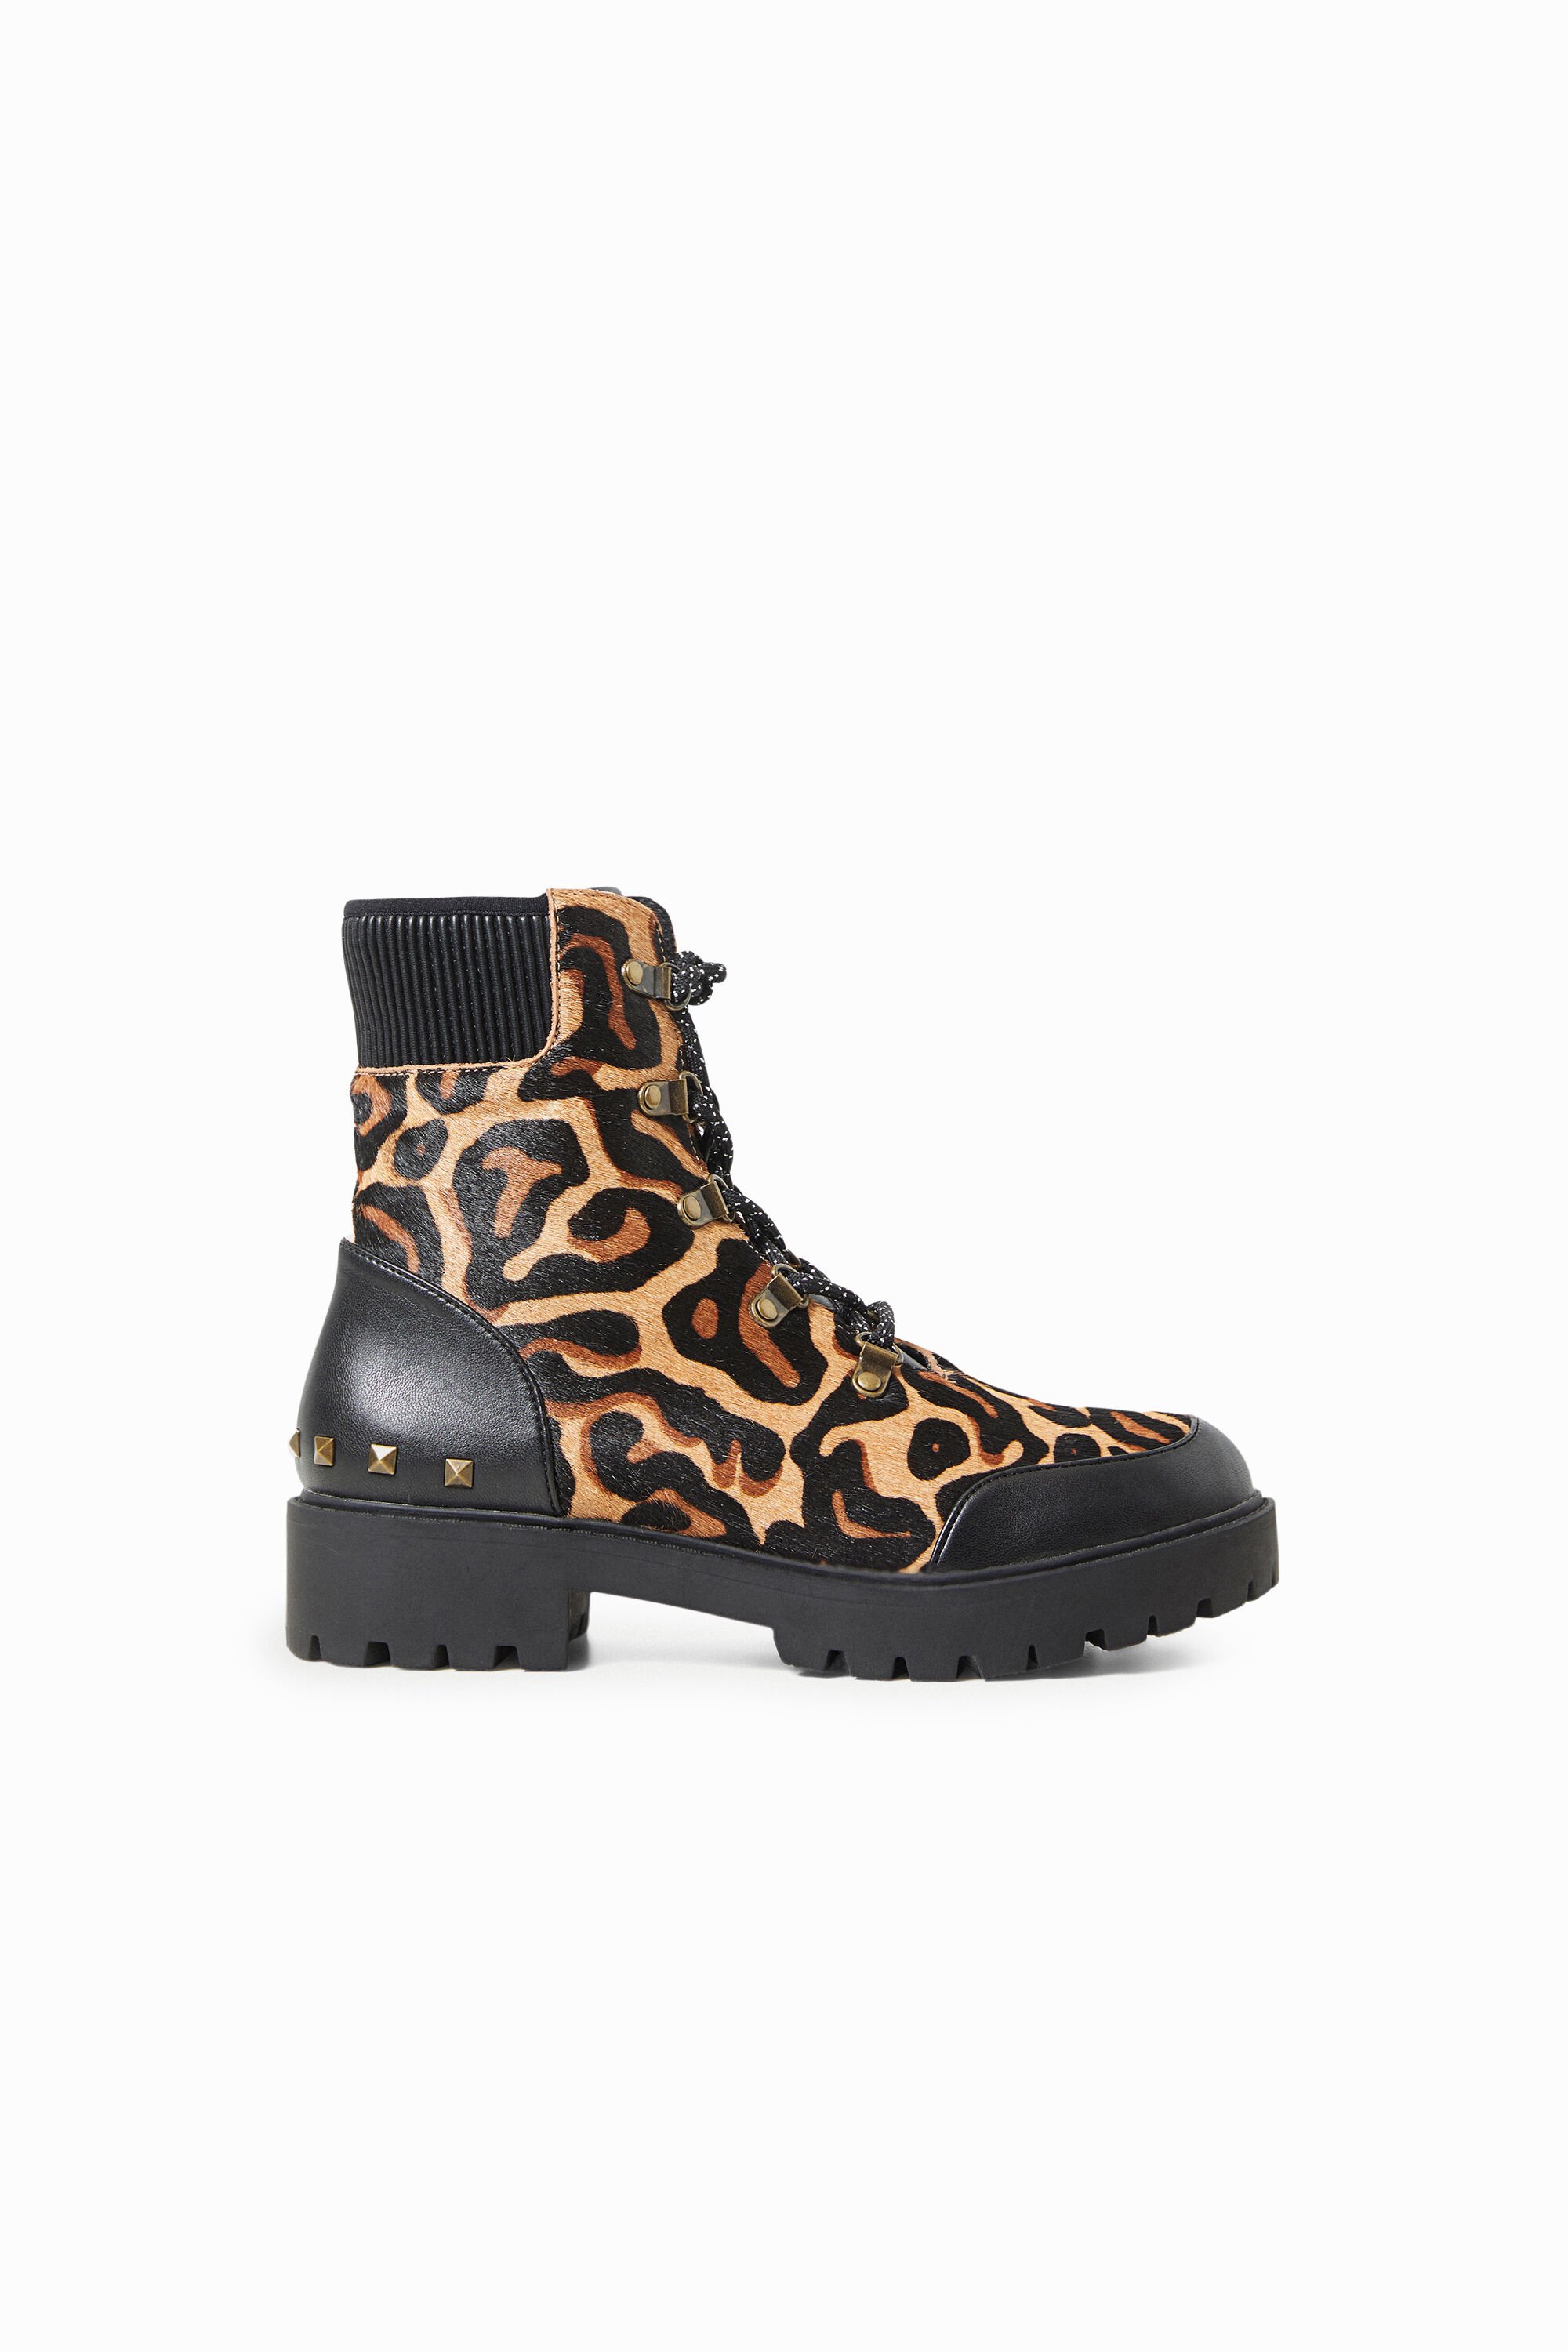 Animal print leather boots - BROWN - 36